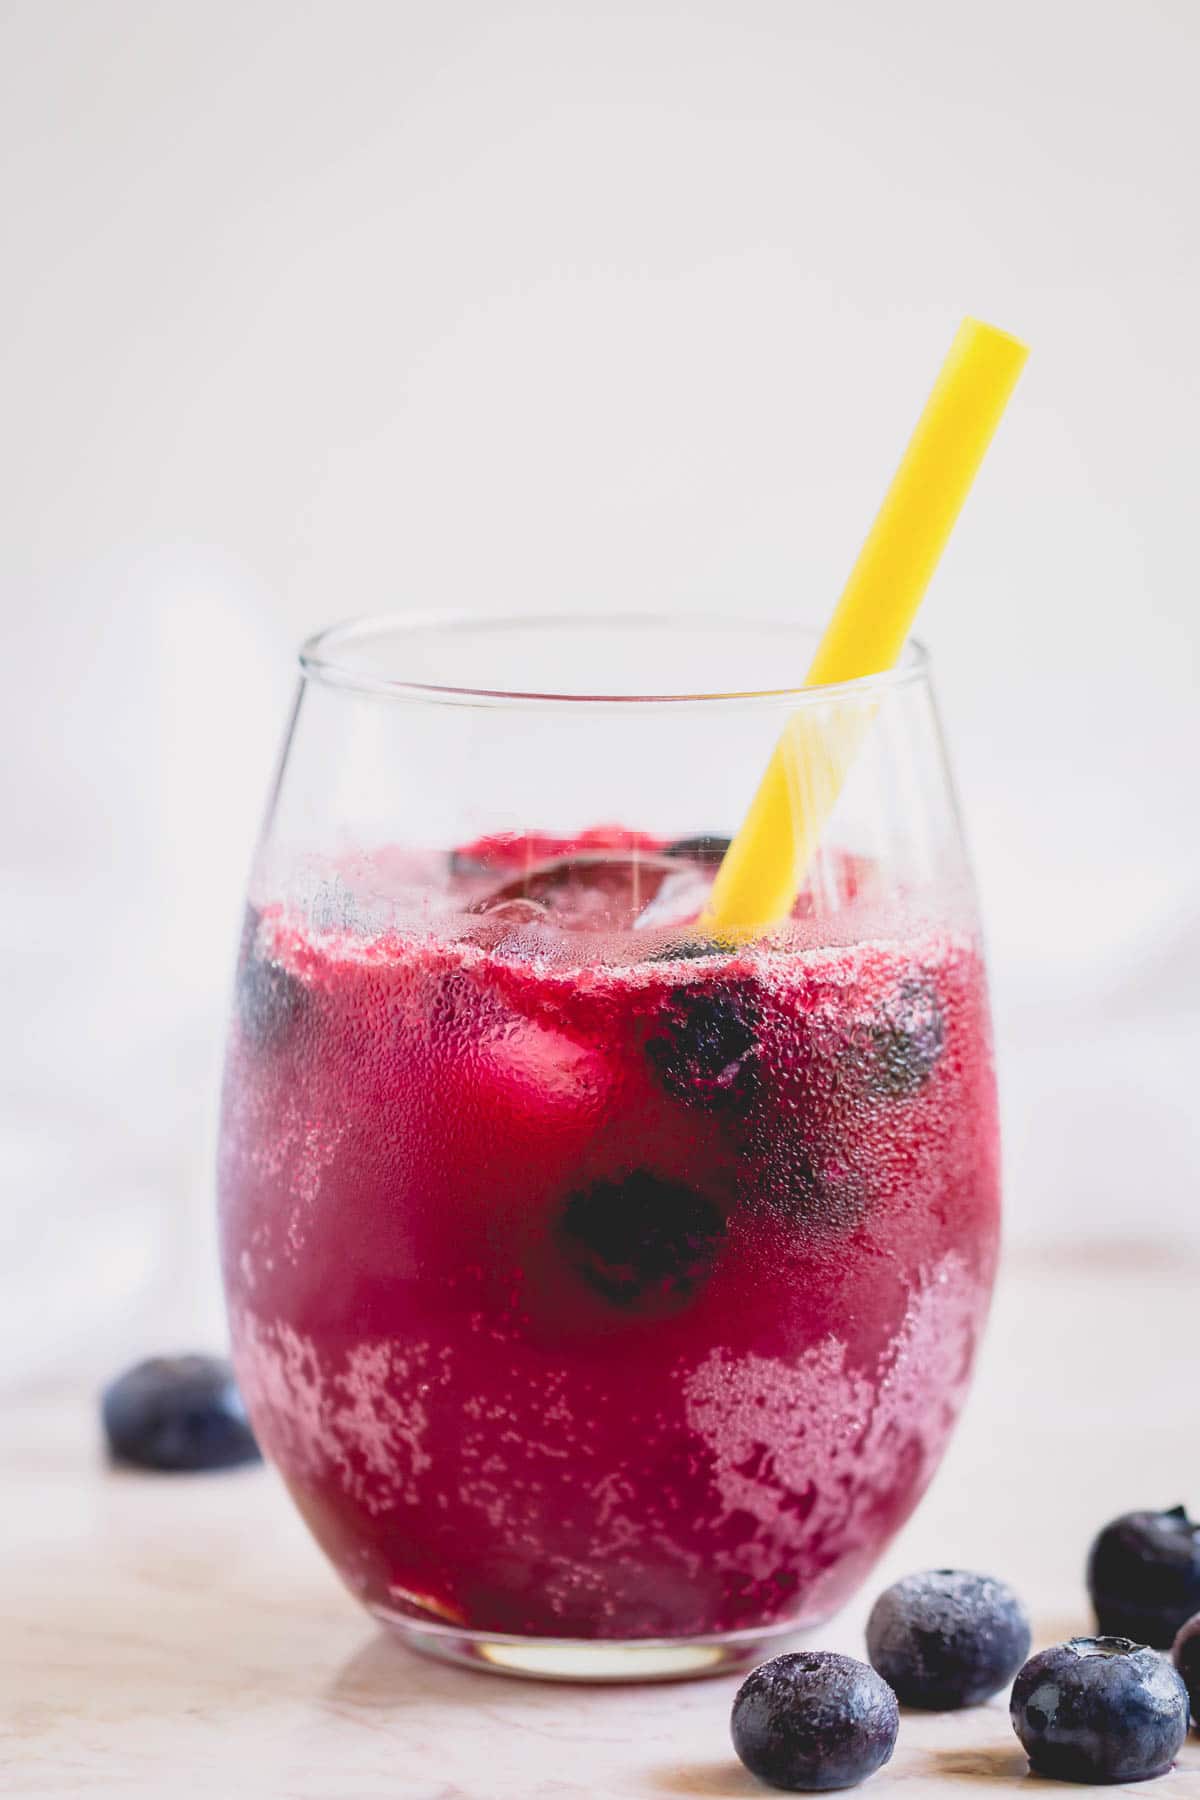 A glass of sparkling blueberry lemonade with a yellow straw.